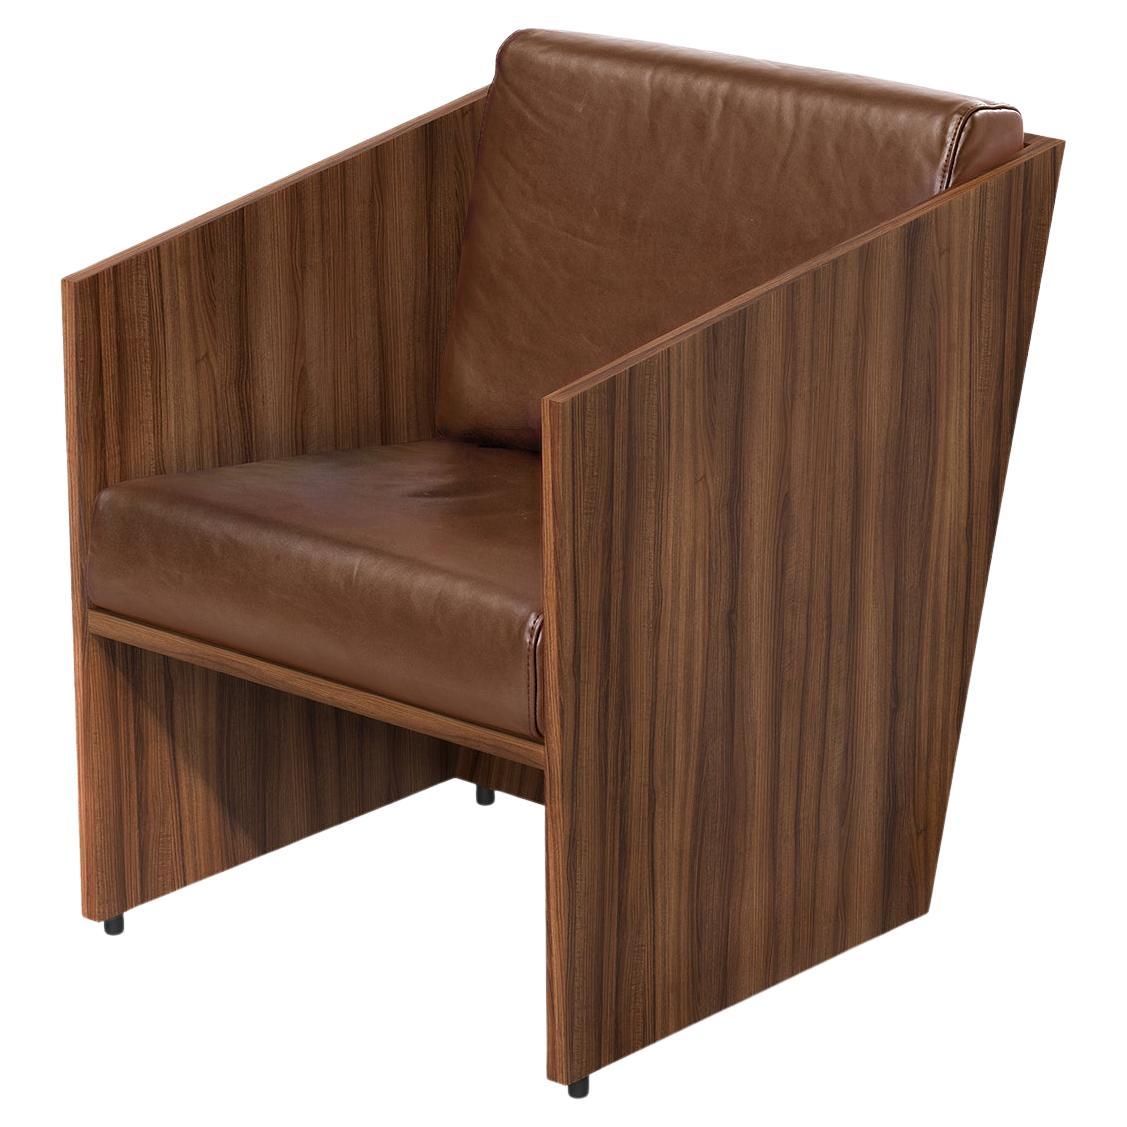 Álvaro Siza Vieira - Armchair in Walnut Wood and Brown Leather - one of a kind For Sale